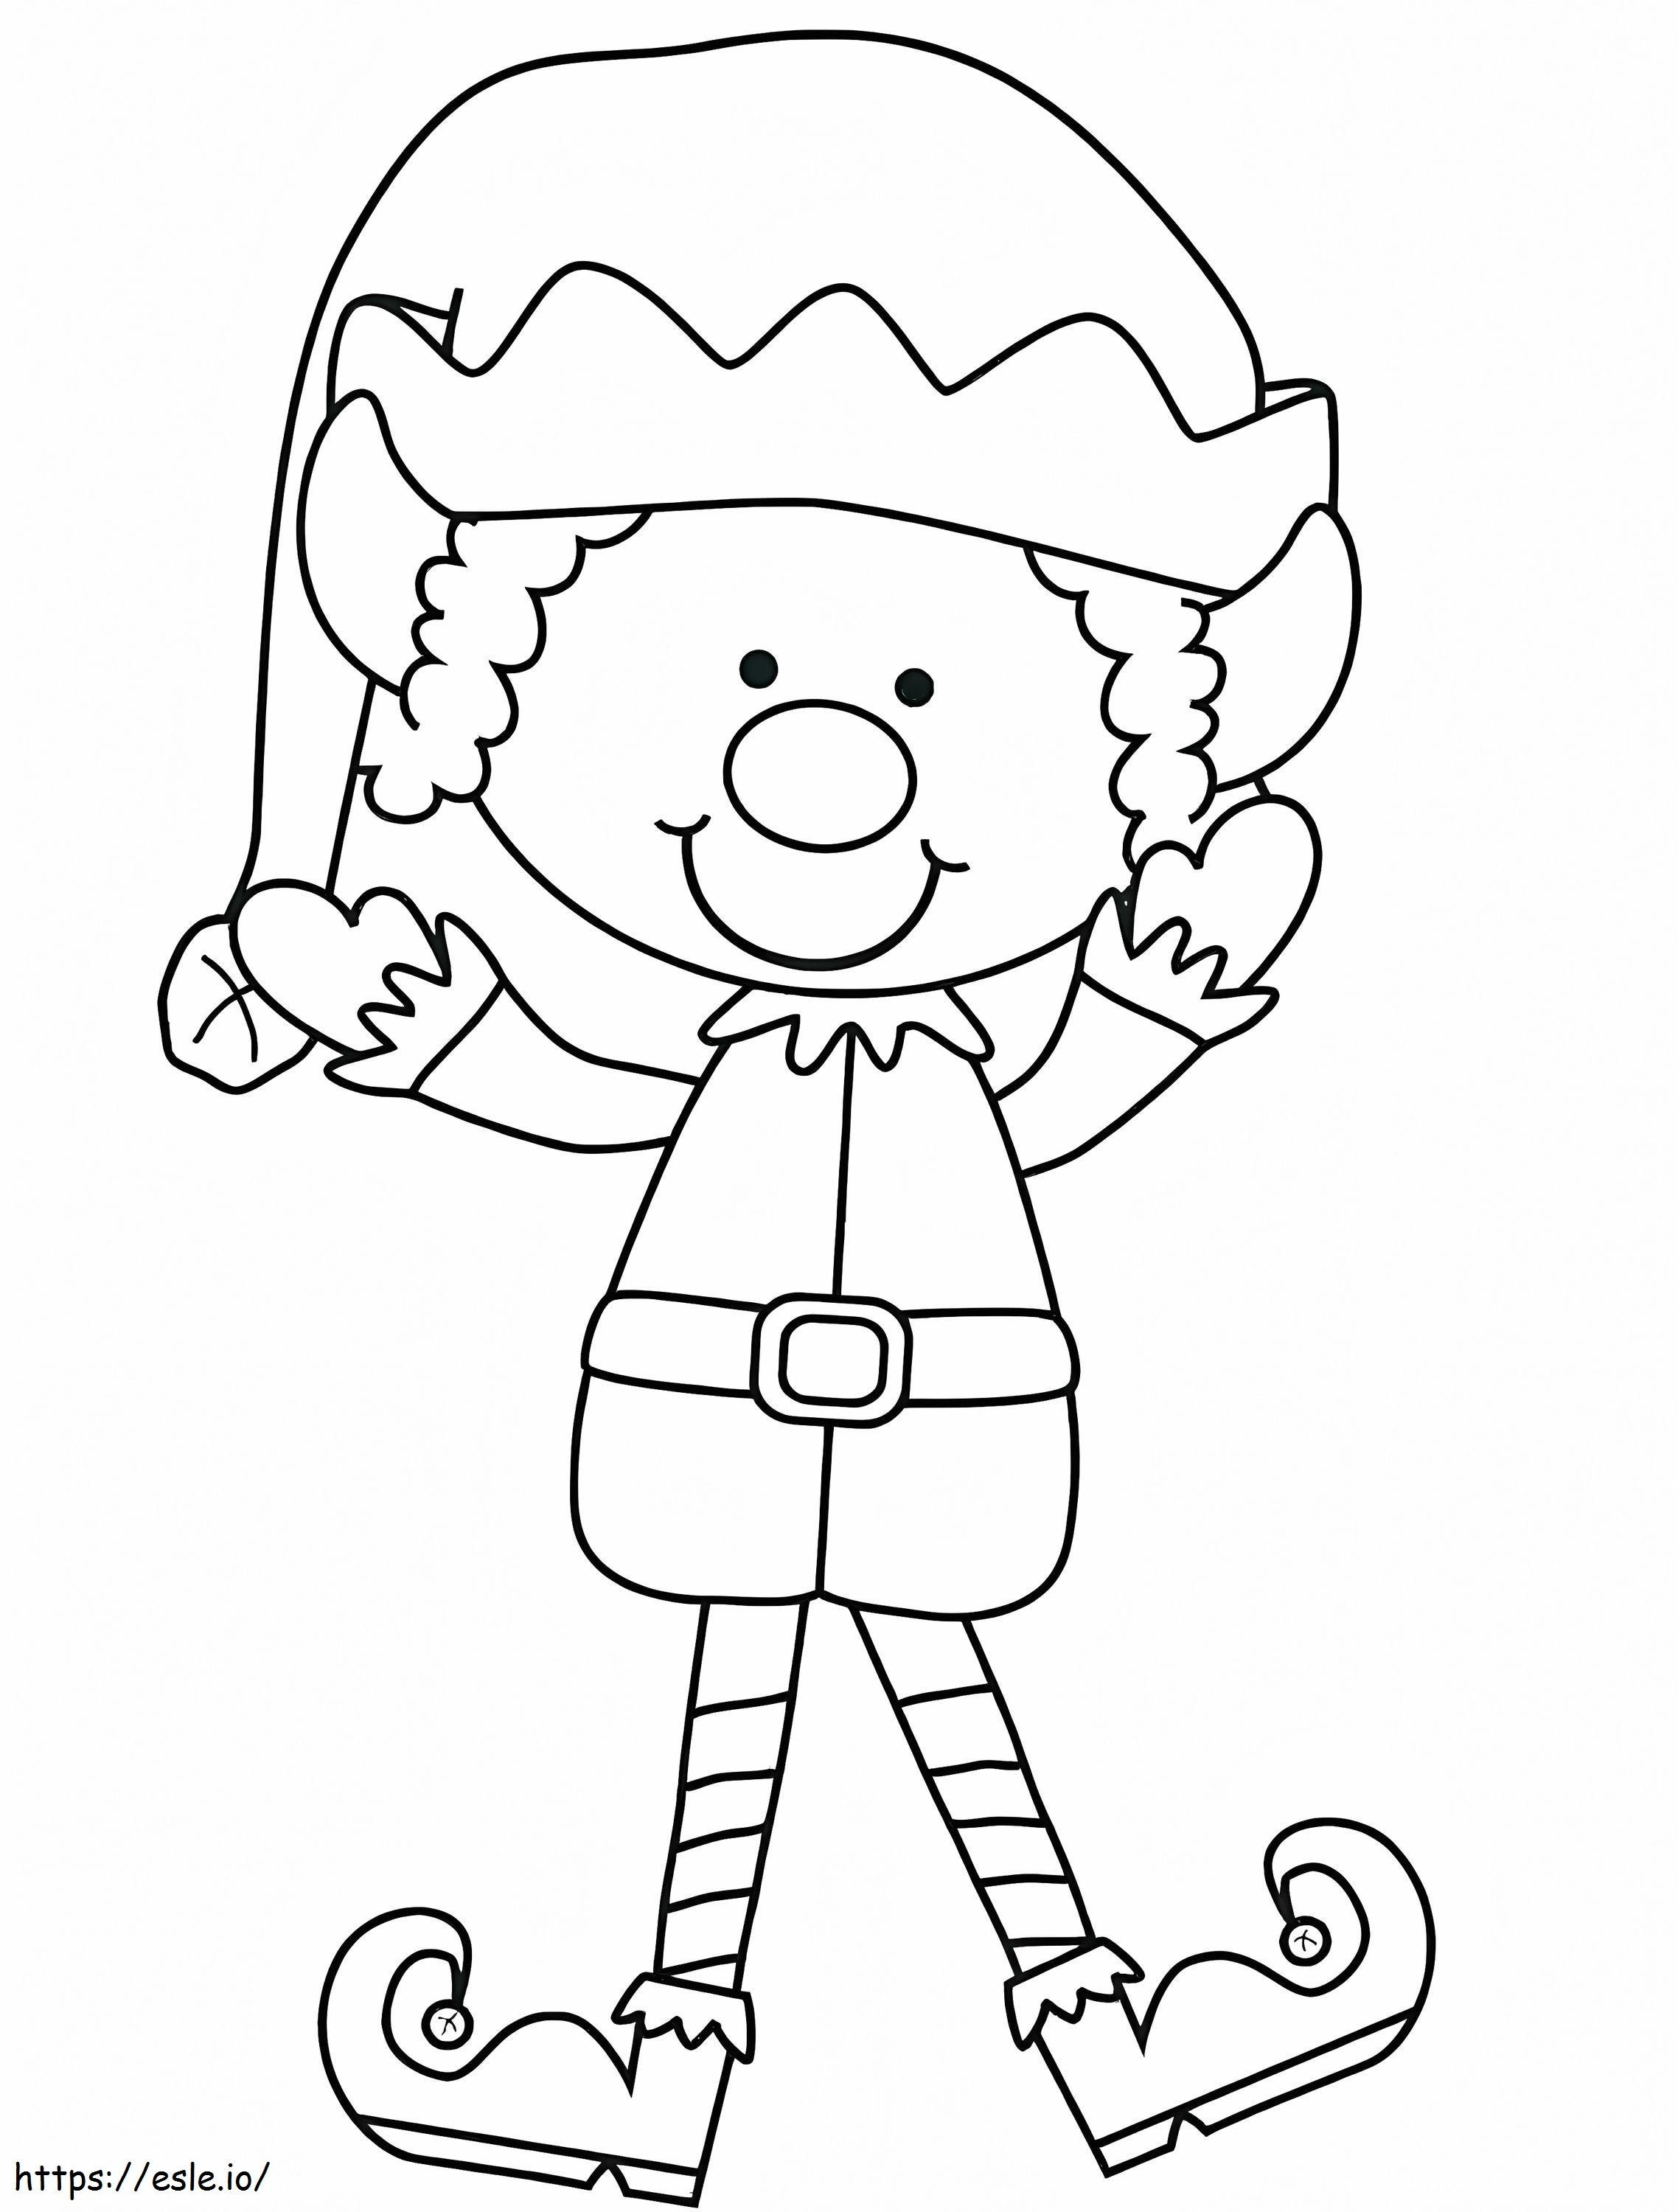 Little Elf coloring page